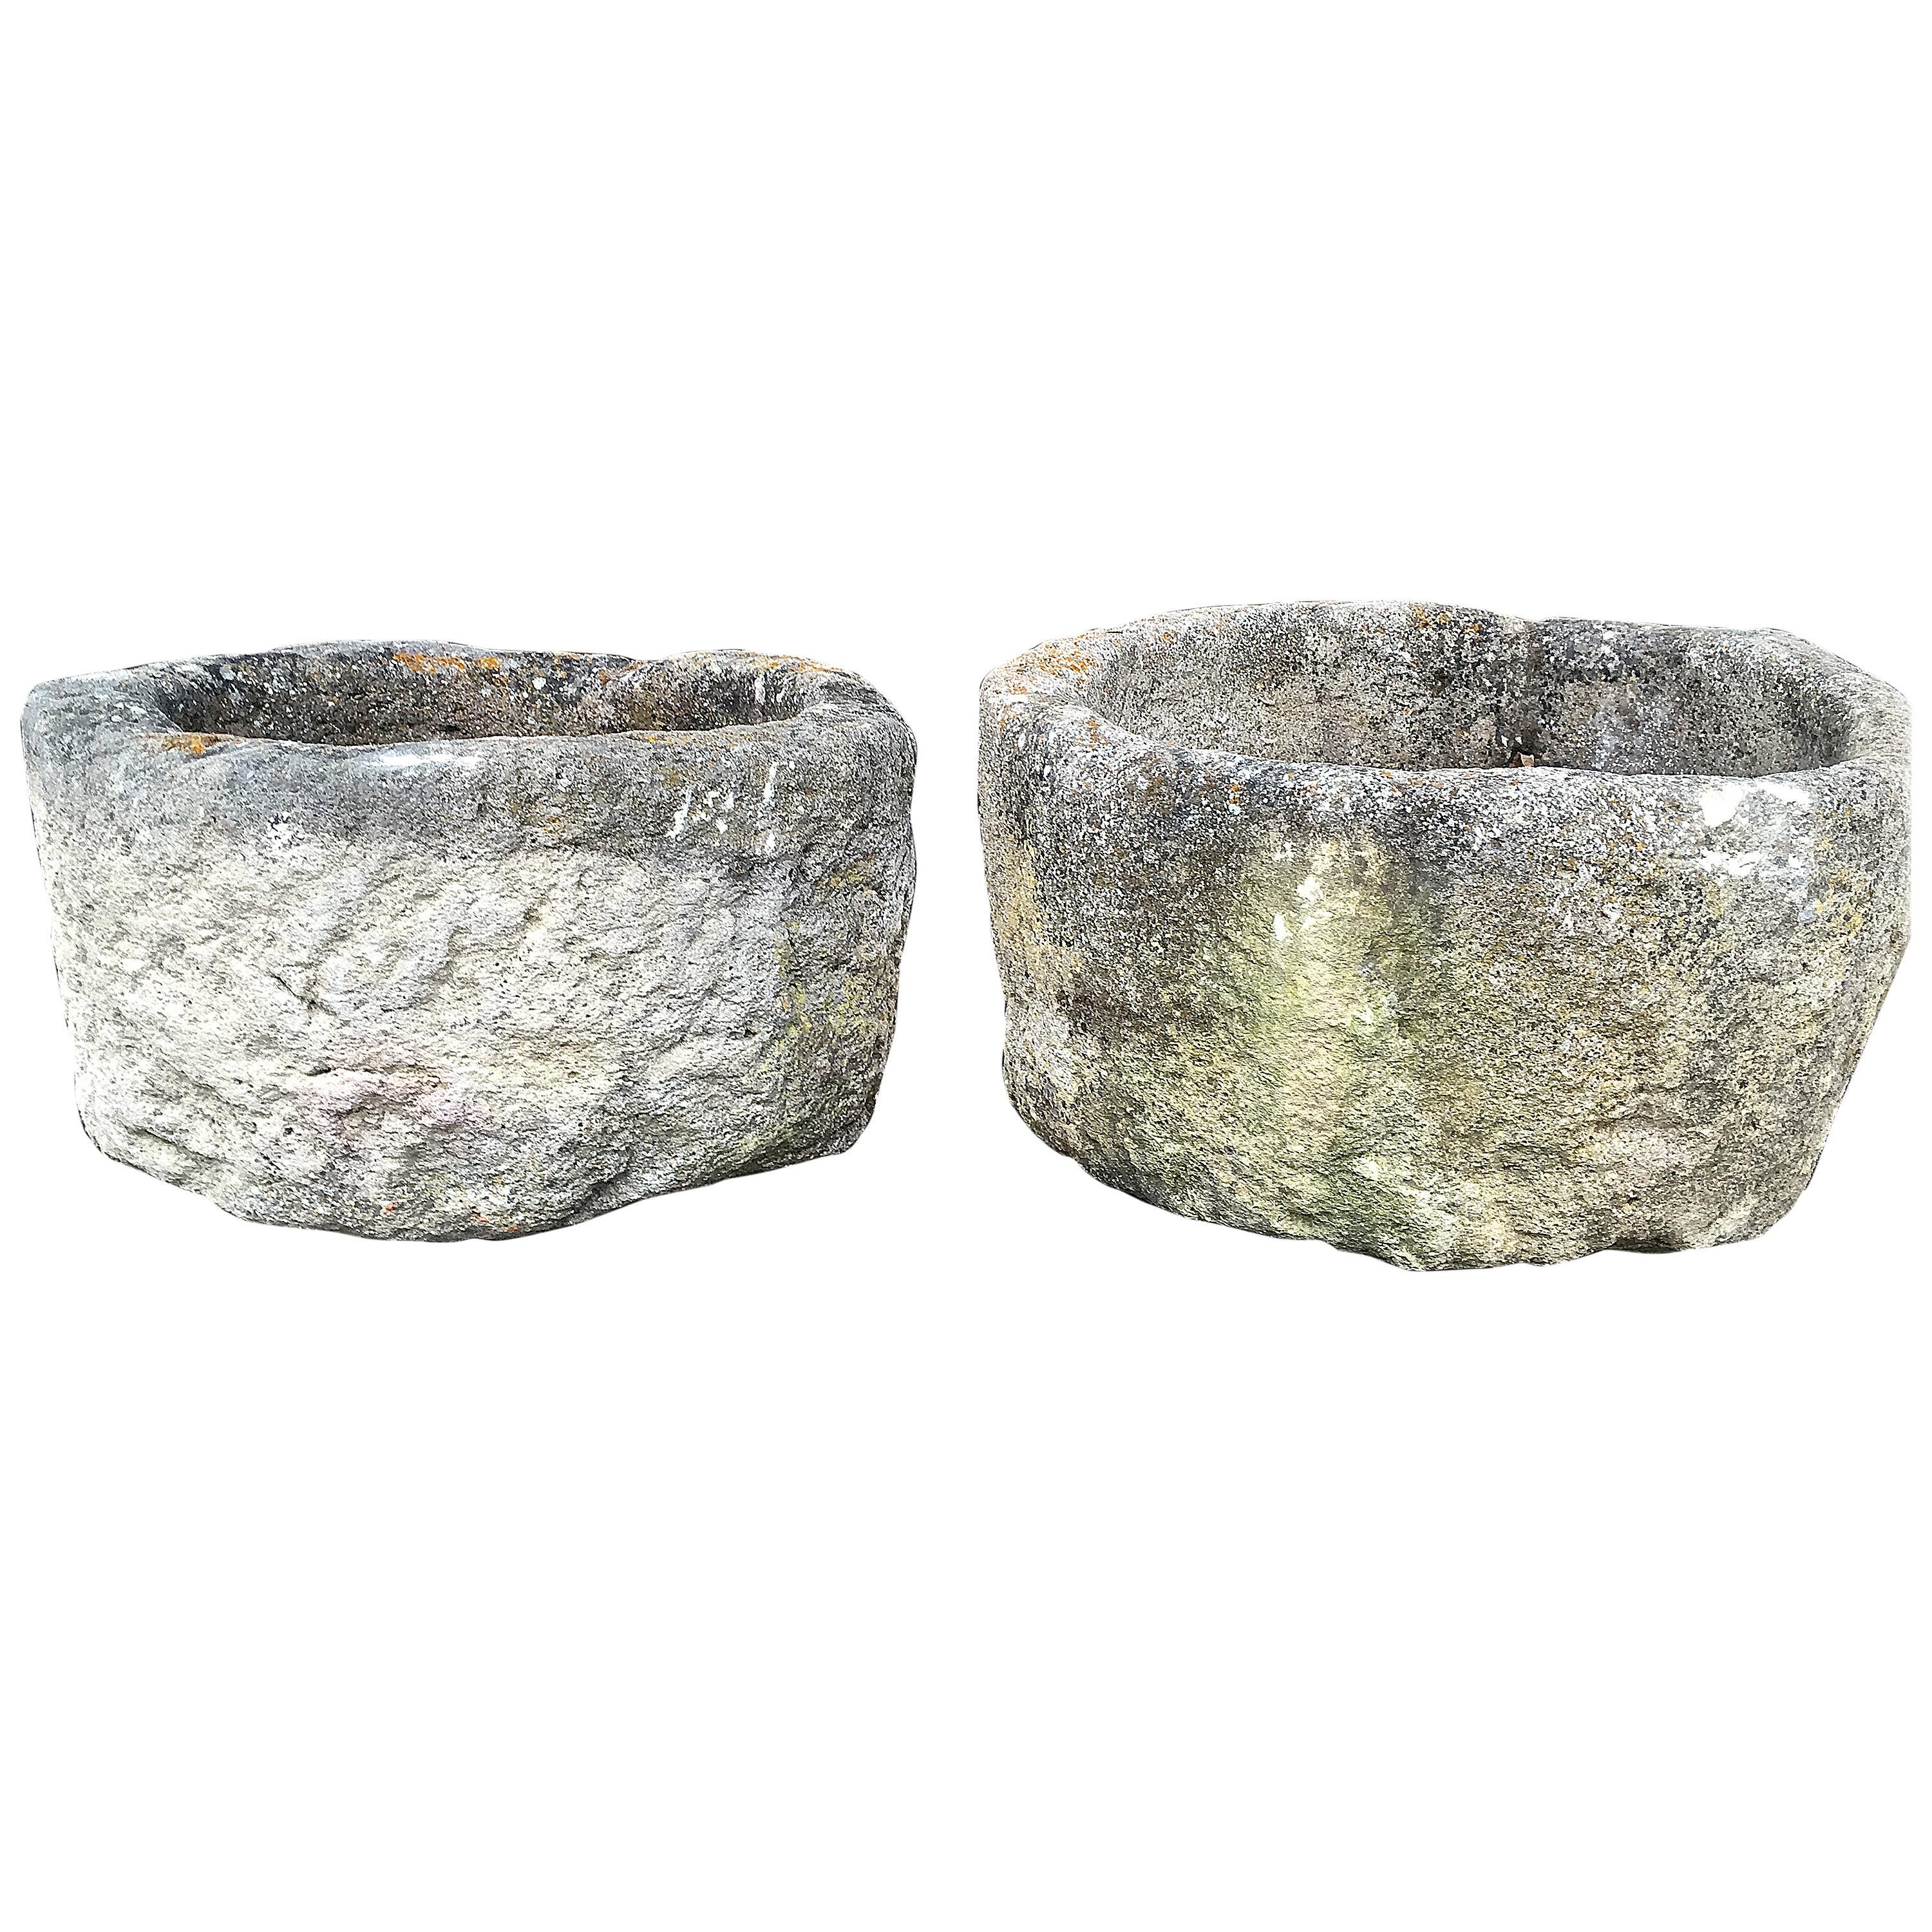 Pair of Hand-Carved Stone 18th Century Troughs or Planters